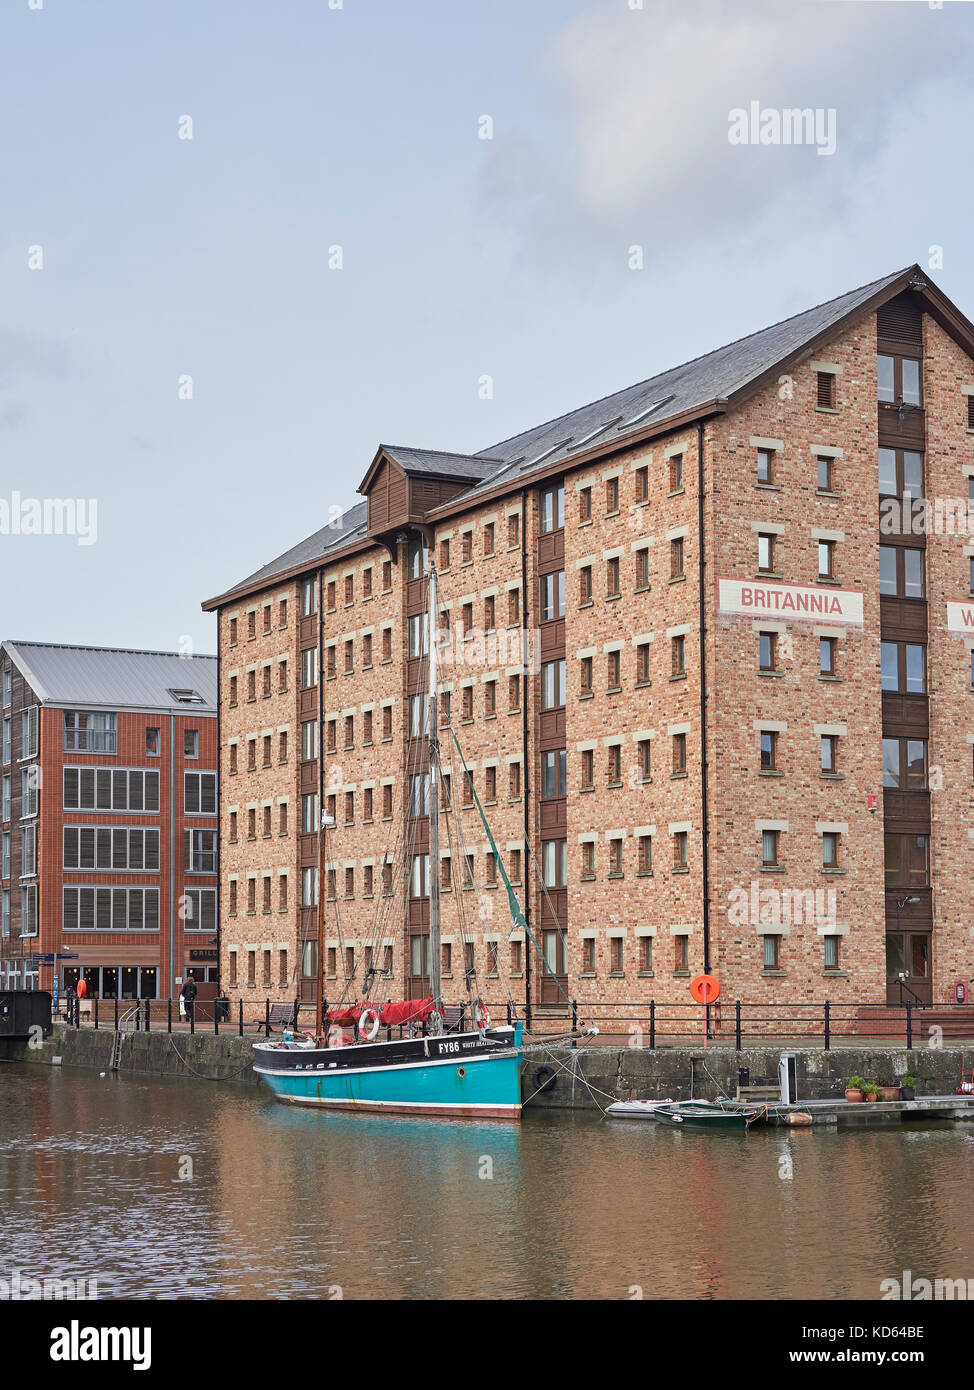 The City of Gloucester and Gloucester docks Stock Photo